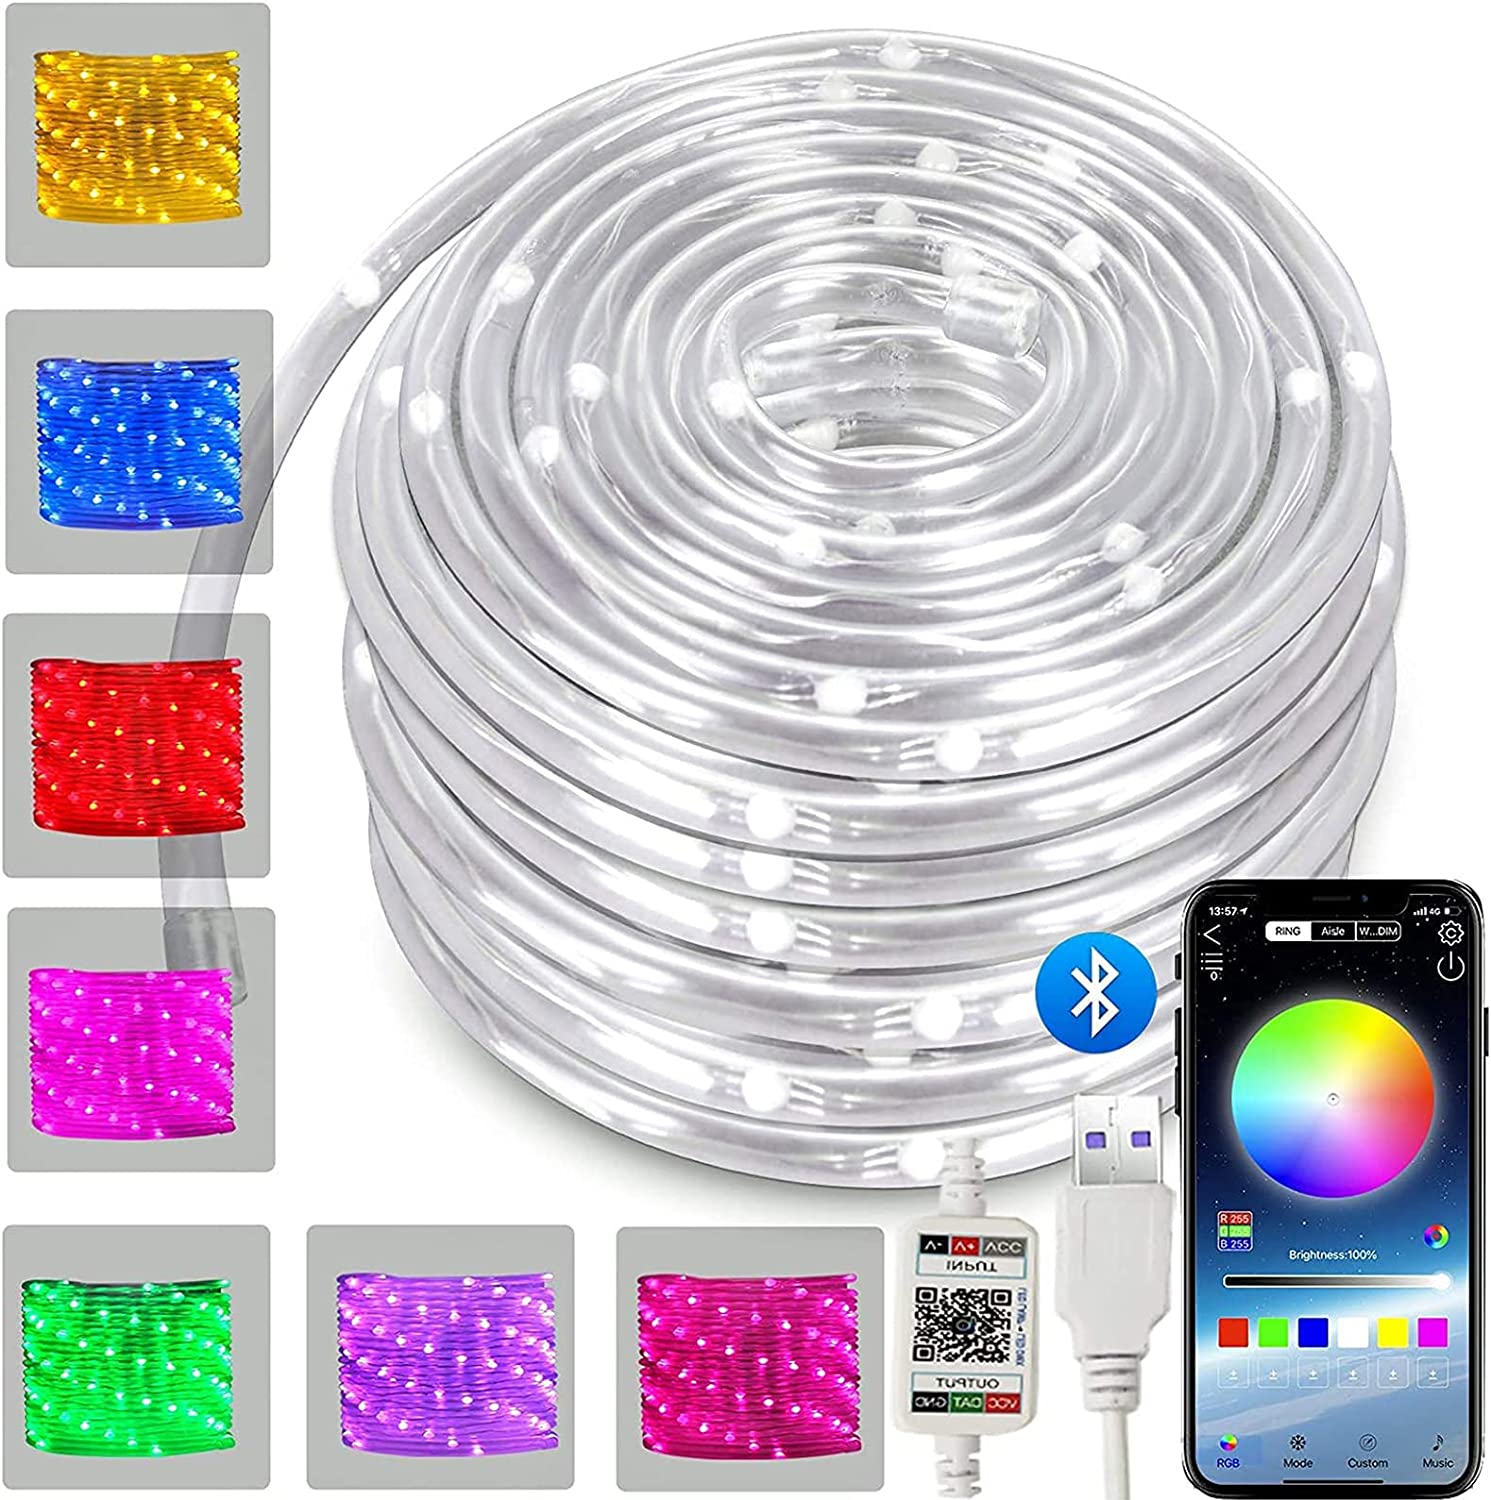 LOGUIDE LED Rope Lights 33ft 100LED App Smart Bluetooth Color Changing Indoor Lights USB Multicolor Twinkle Tube Fairy Lights for Indoor Bedroom Christmas Wedding Party Waterproof Outdoor Decorations